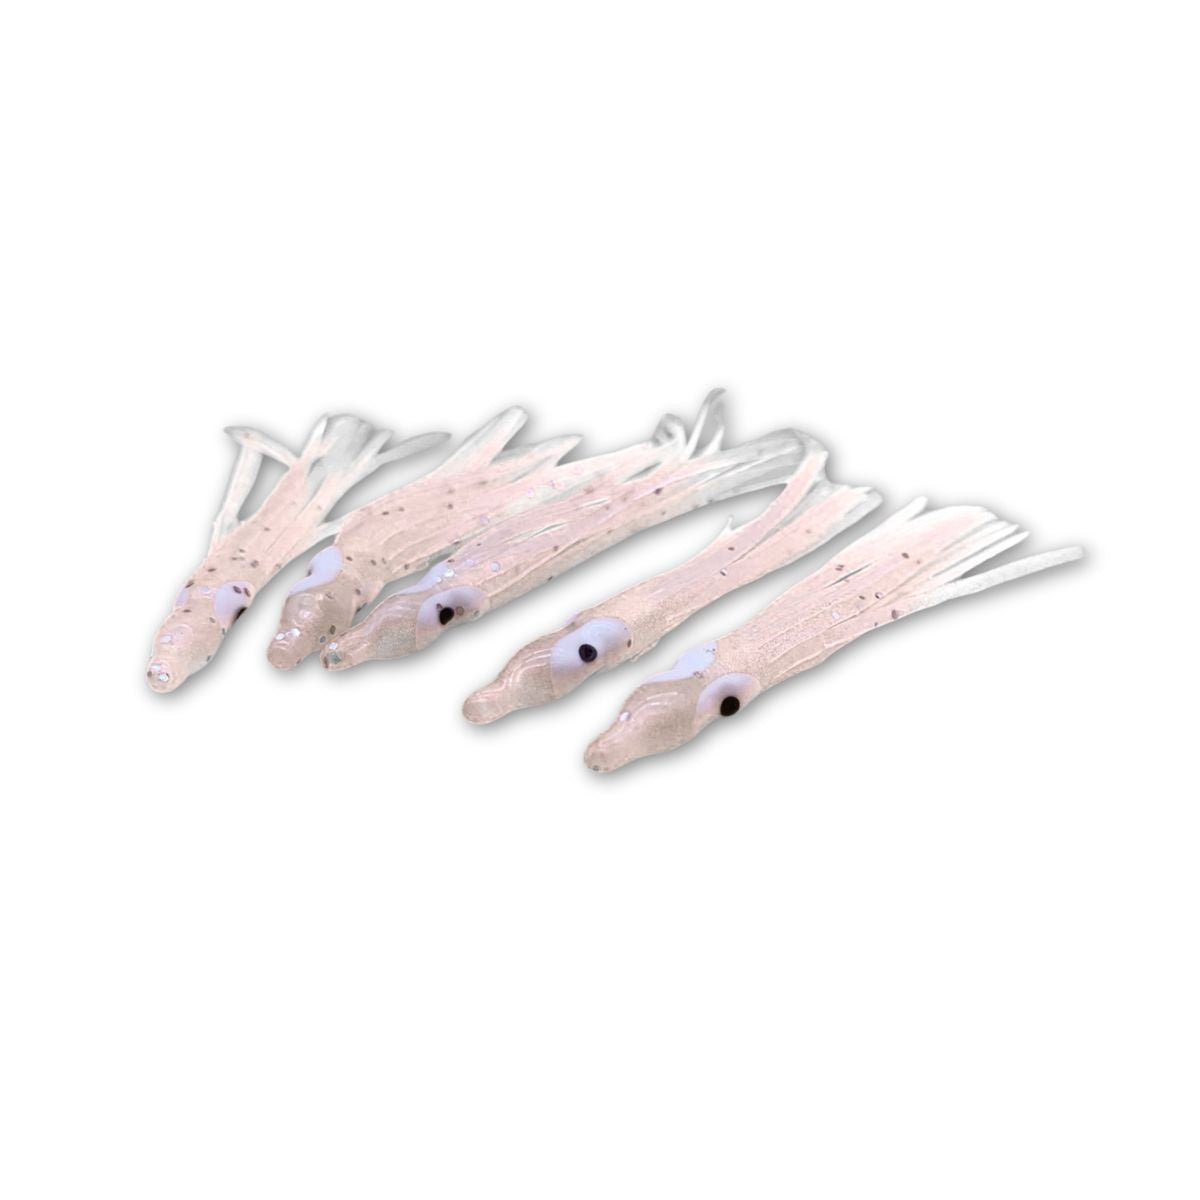 Mini Fishing Squirmies | Pack of 5 - South East Clearance Centre